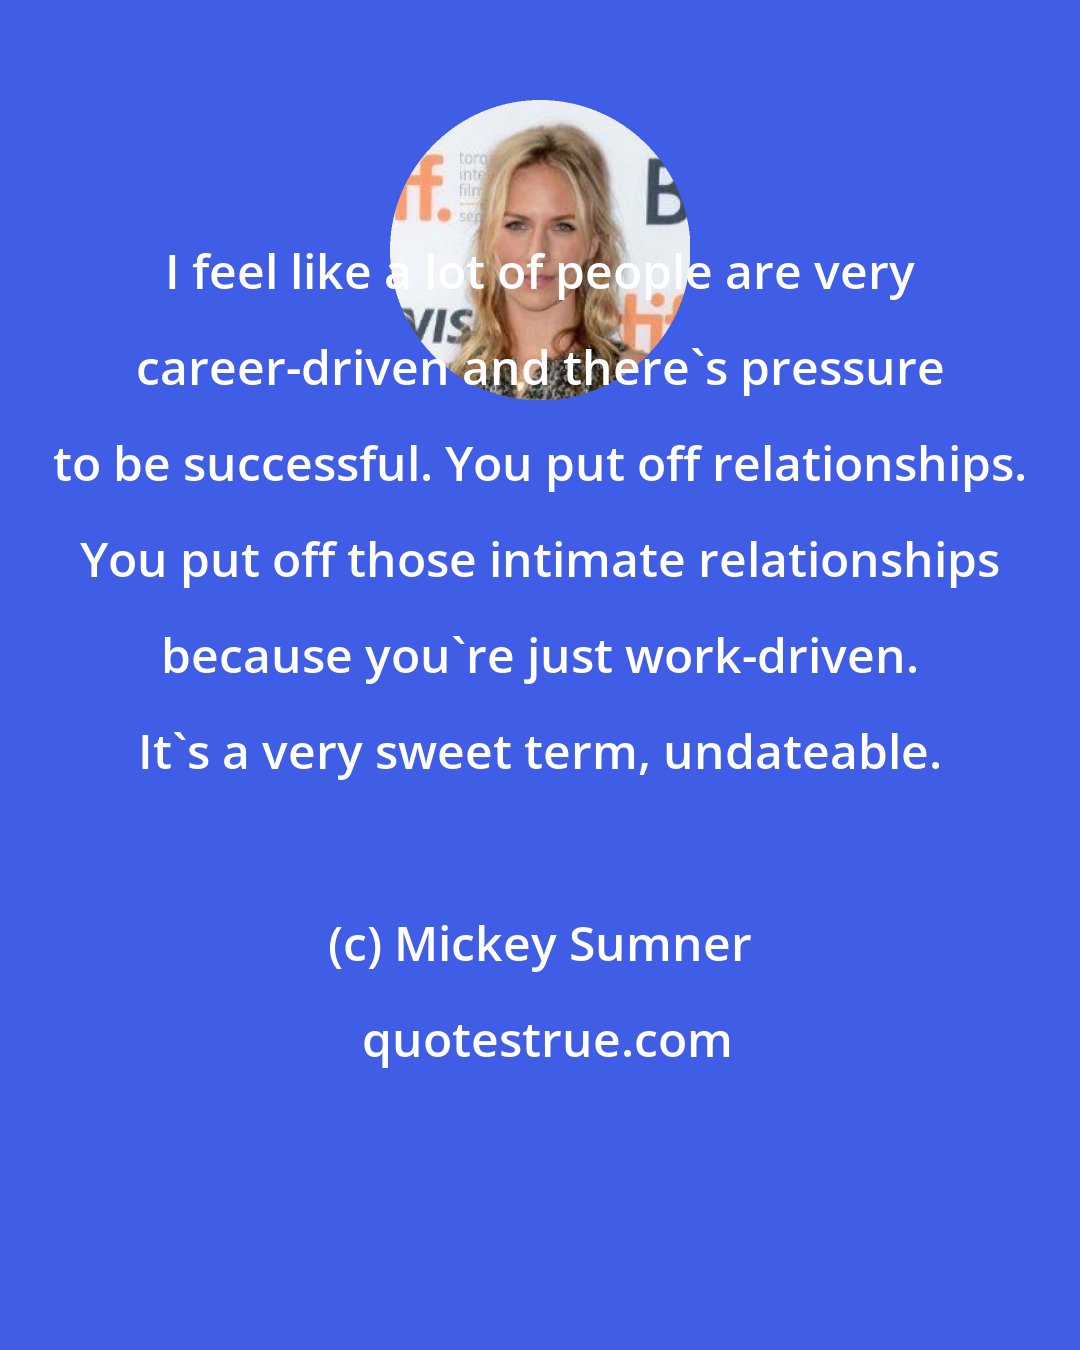 Mickey Sumner: I feel like a lot of people are very career-driven and there's pressure to be successful. You put off relationships. You put off those intimate relationships because you're just work-driven. It's a very sweet term, undateable.